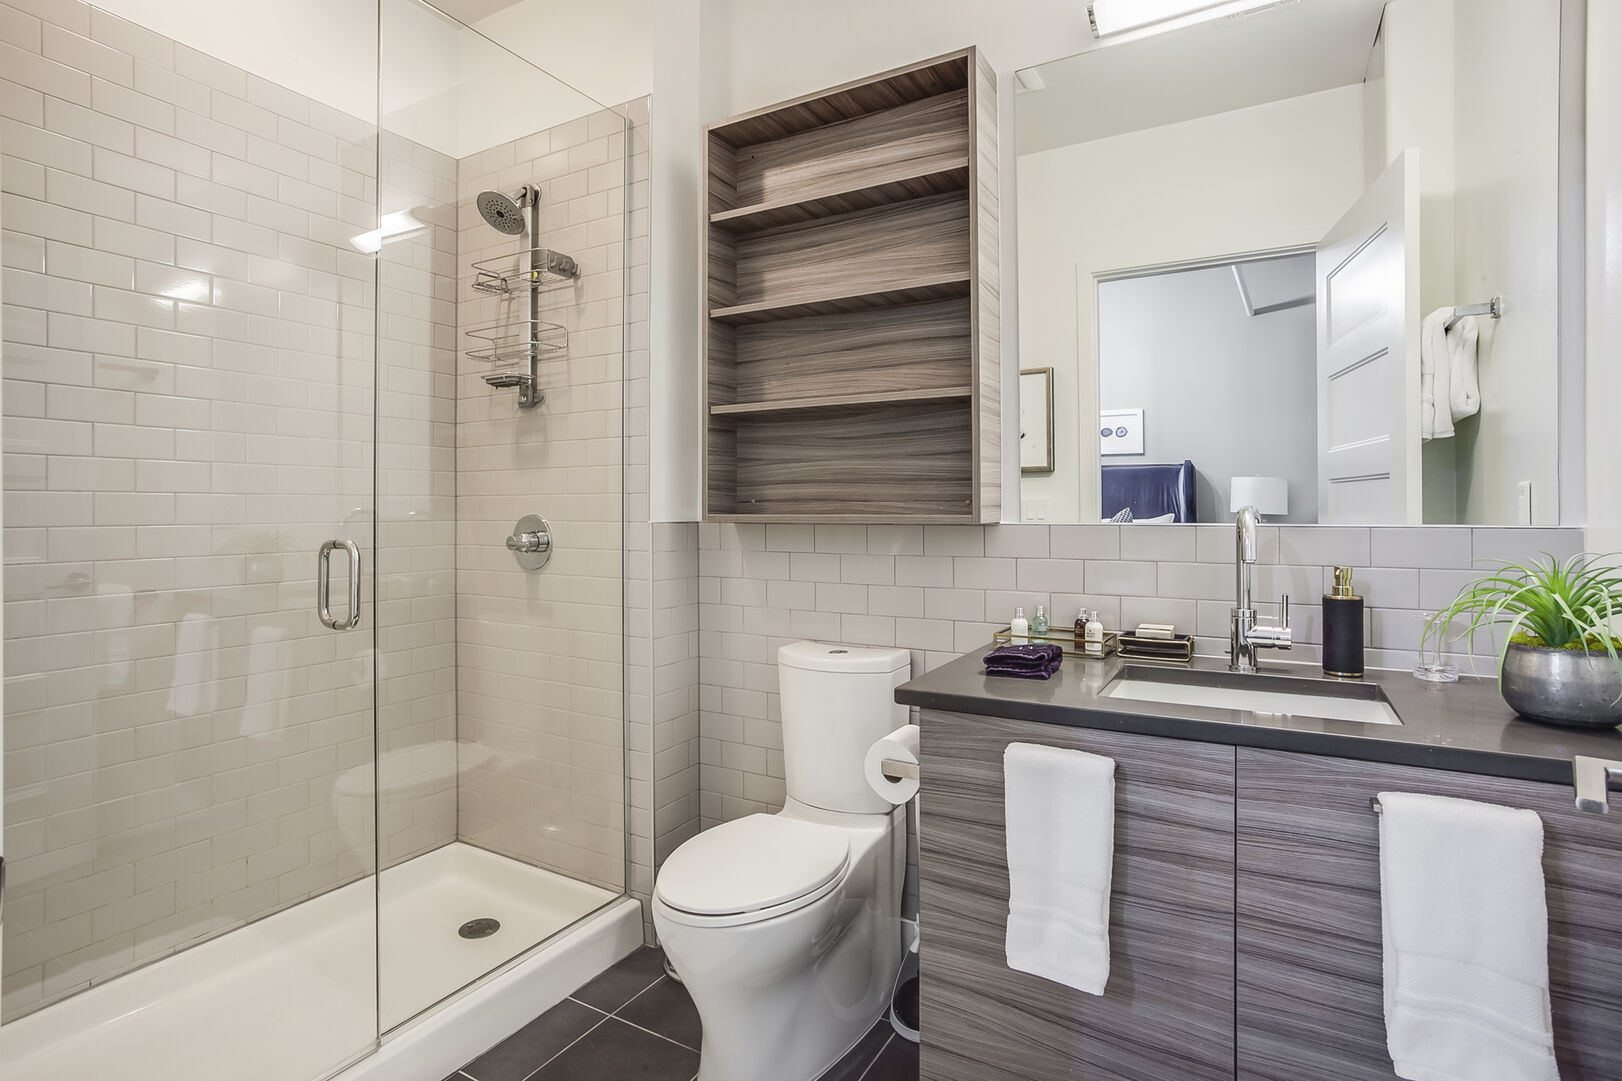 Master Bathroom Features a Walk-In Shower